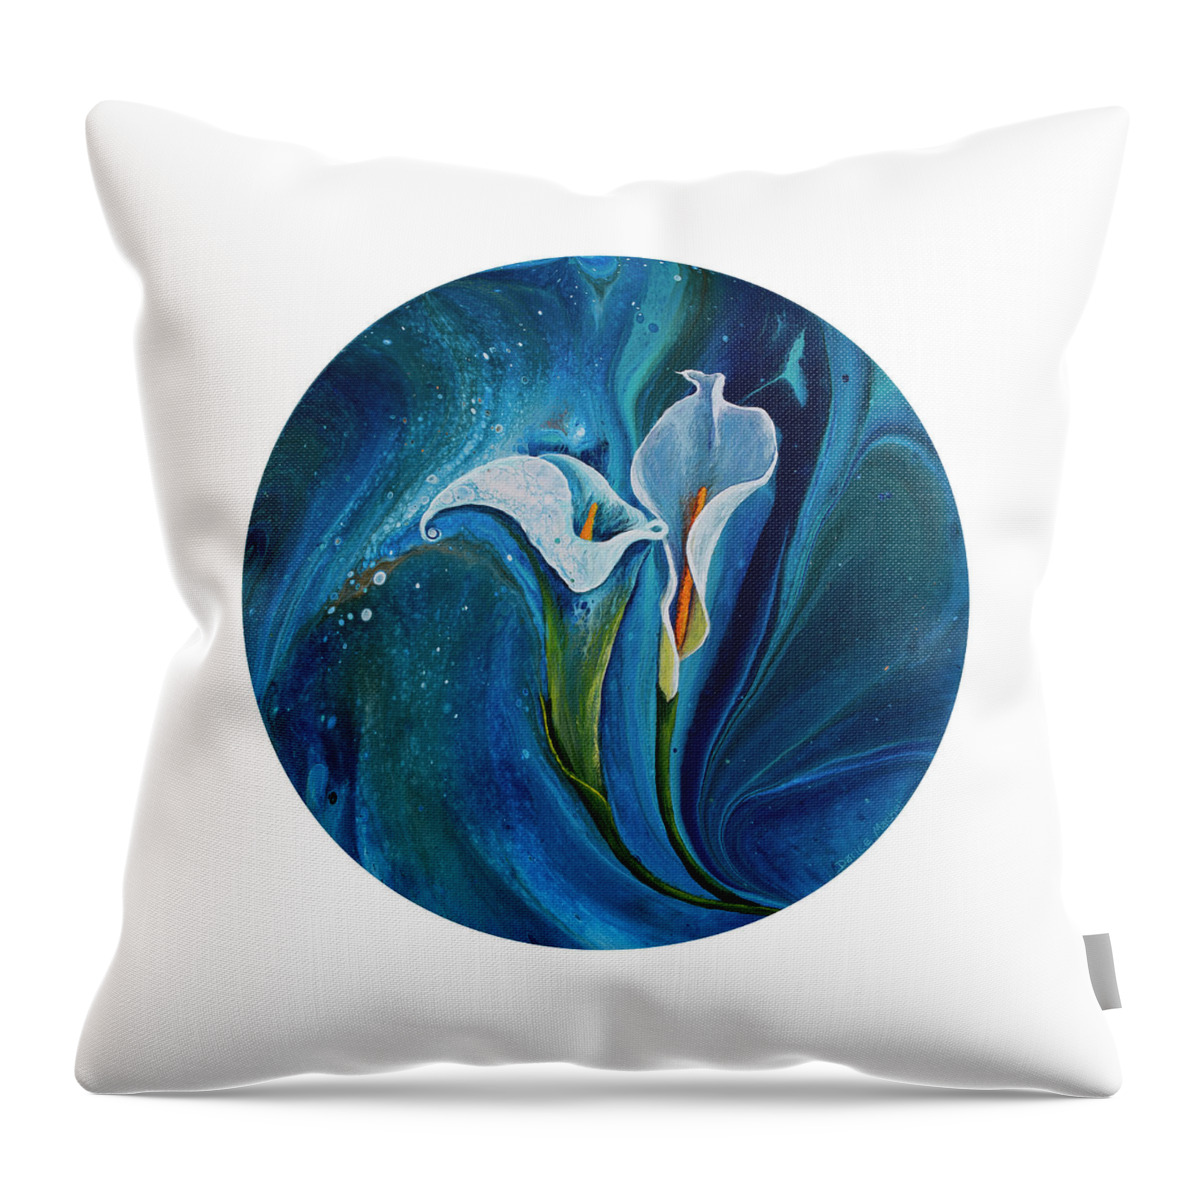 Calla Lily Throw Pillow featuring the painting Calla Lily On White by Darice Machel McGuire